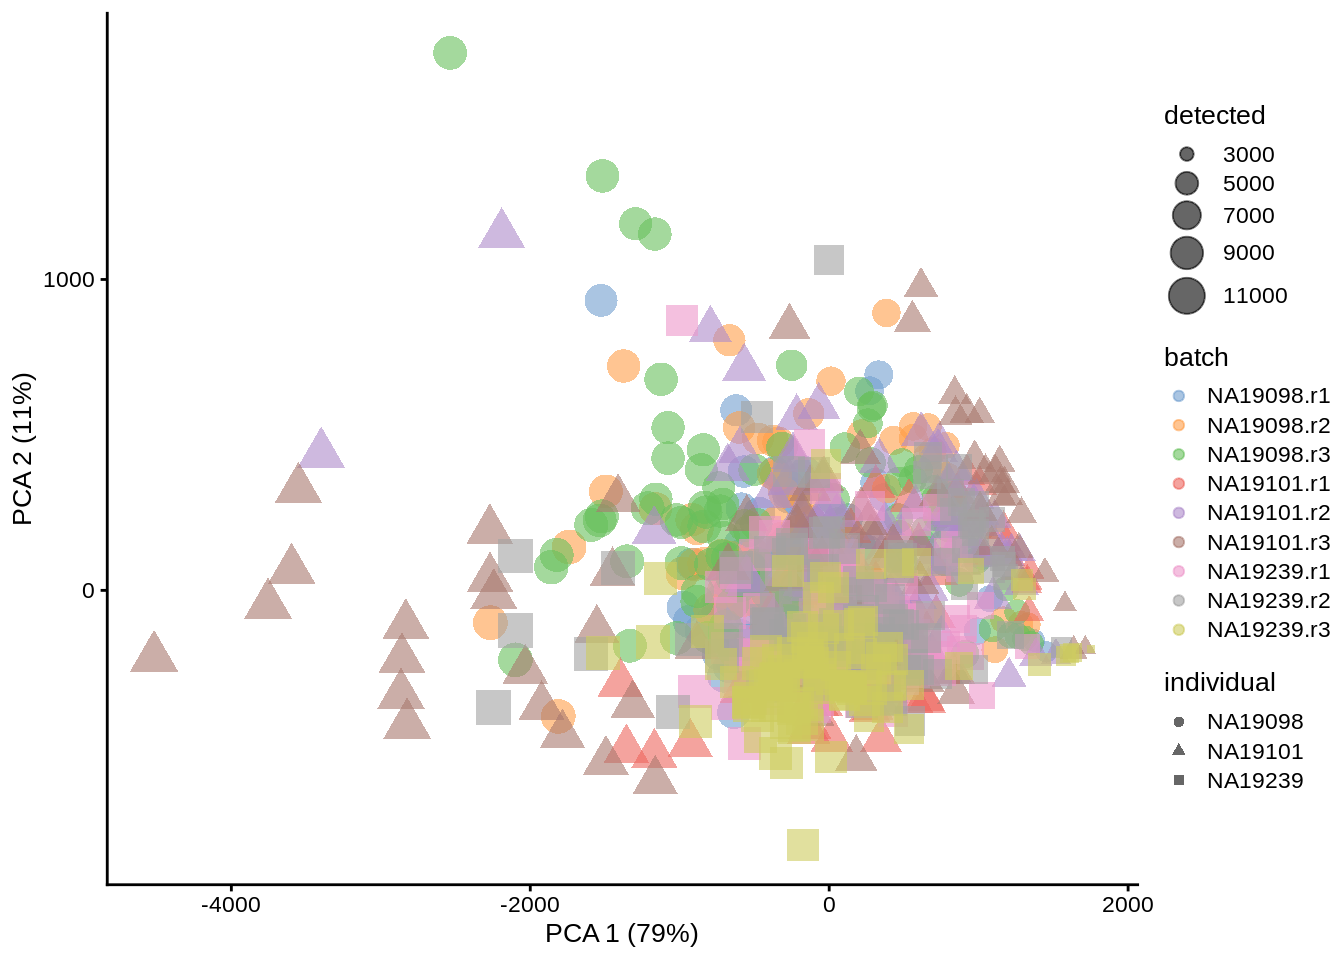 PCA plot of the Tung data (raw counts)